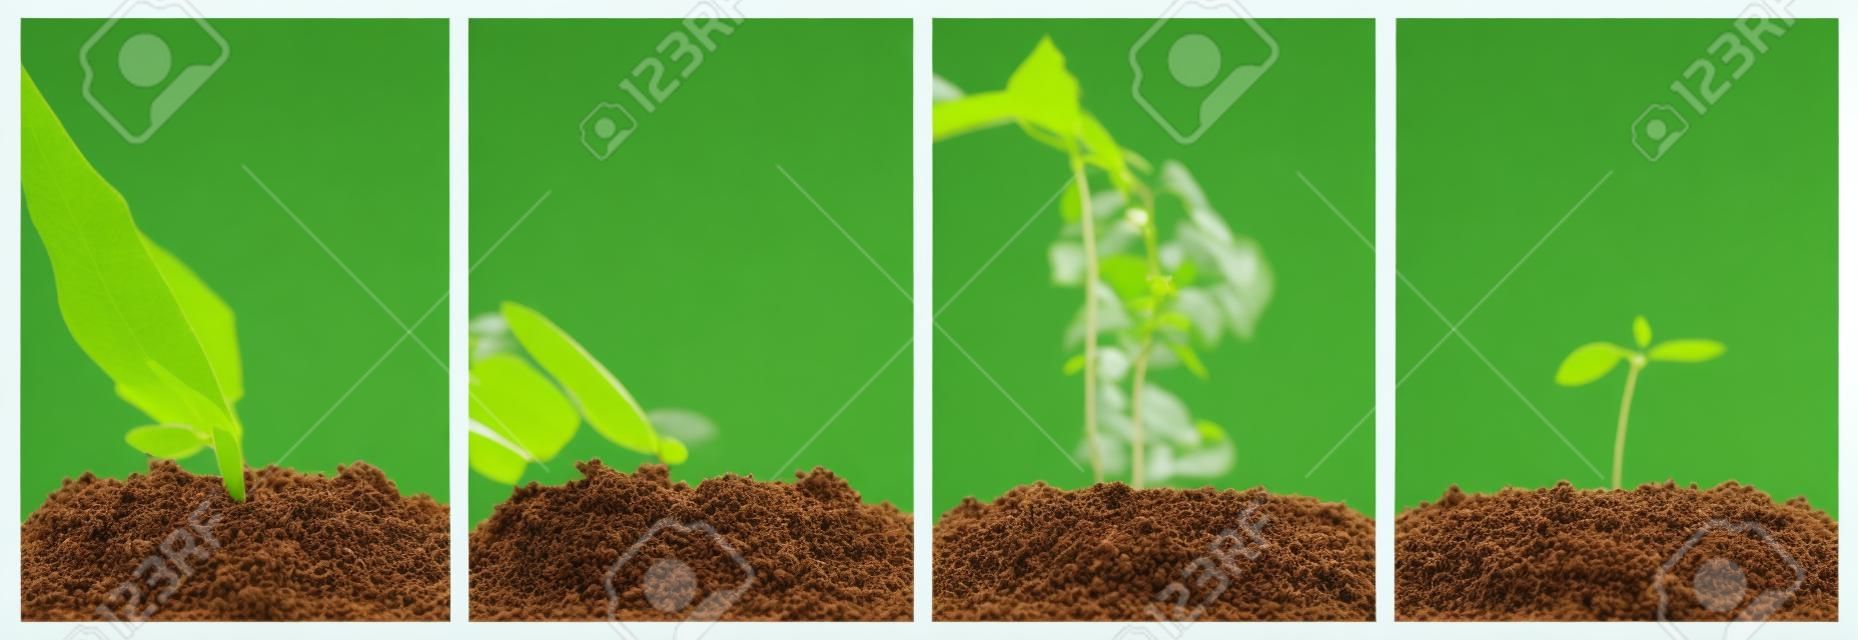 Concept of seeding and plant growing in collection